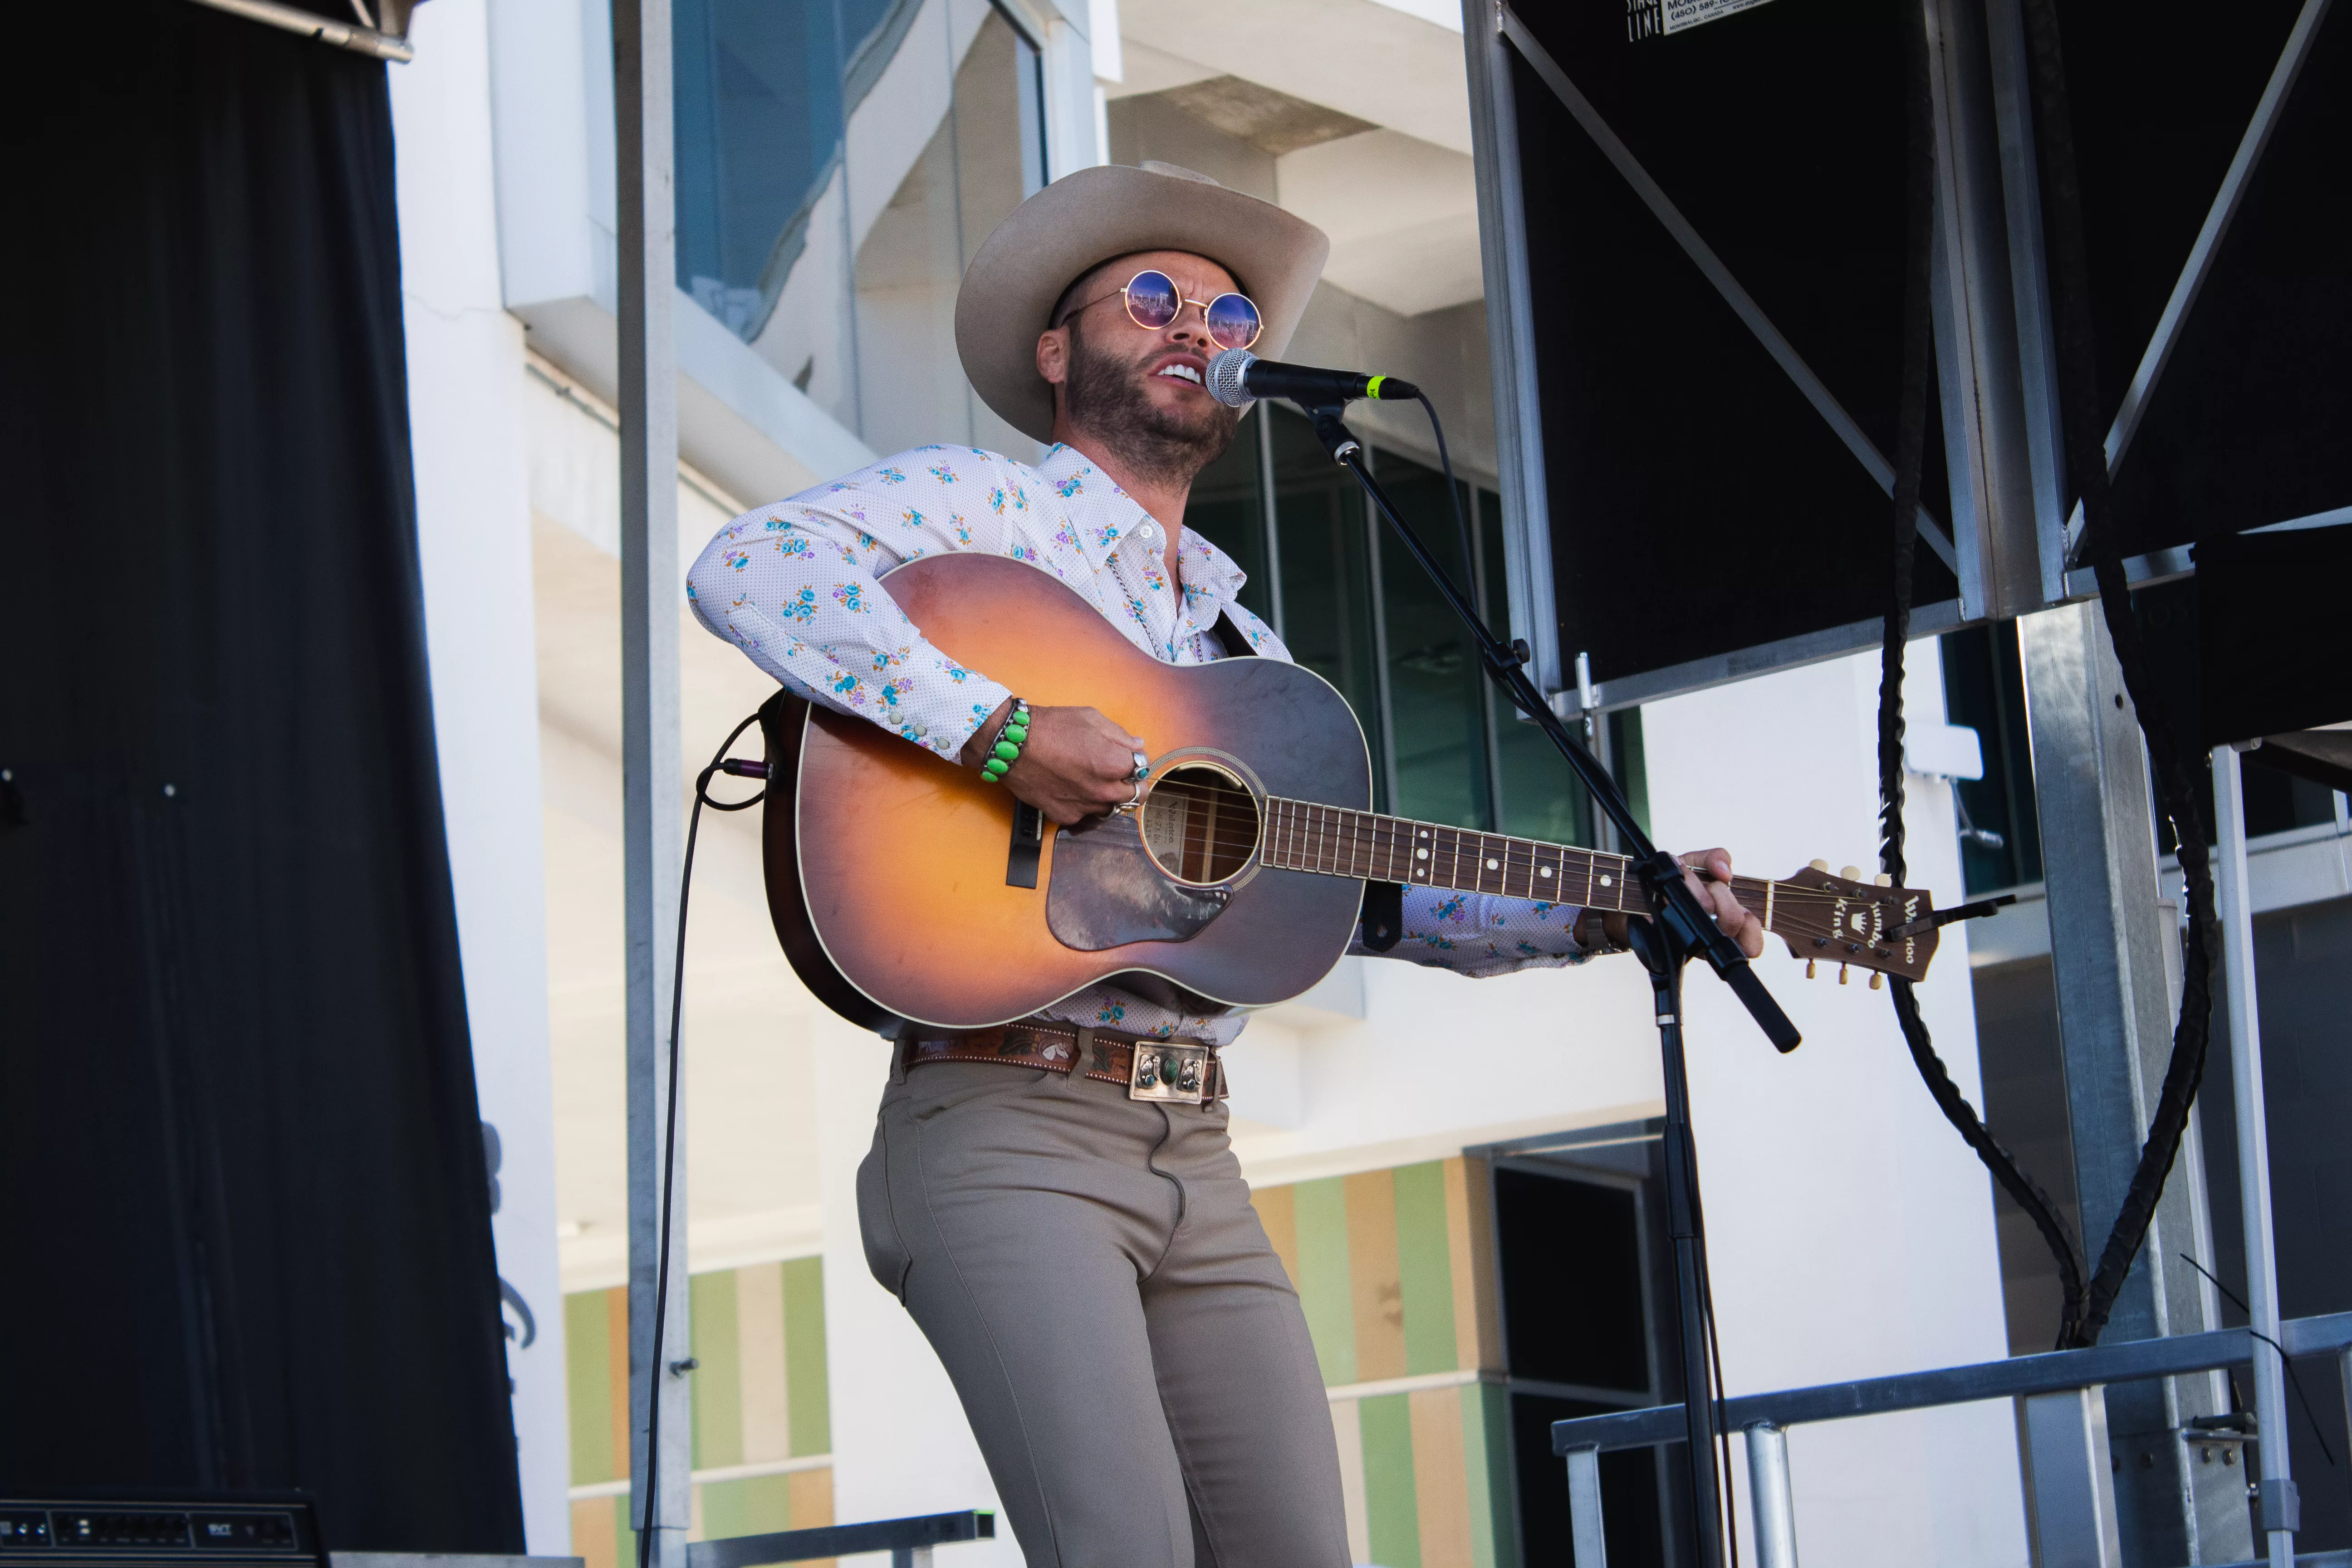 Photo of Charley Crocket at the Long Center for ACL Radio's Live Morning Broadcast during ACL Fest, 2021 (Photo by Vivi Castaneda)